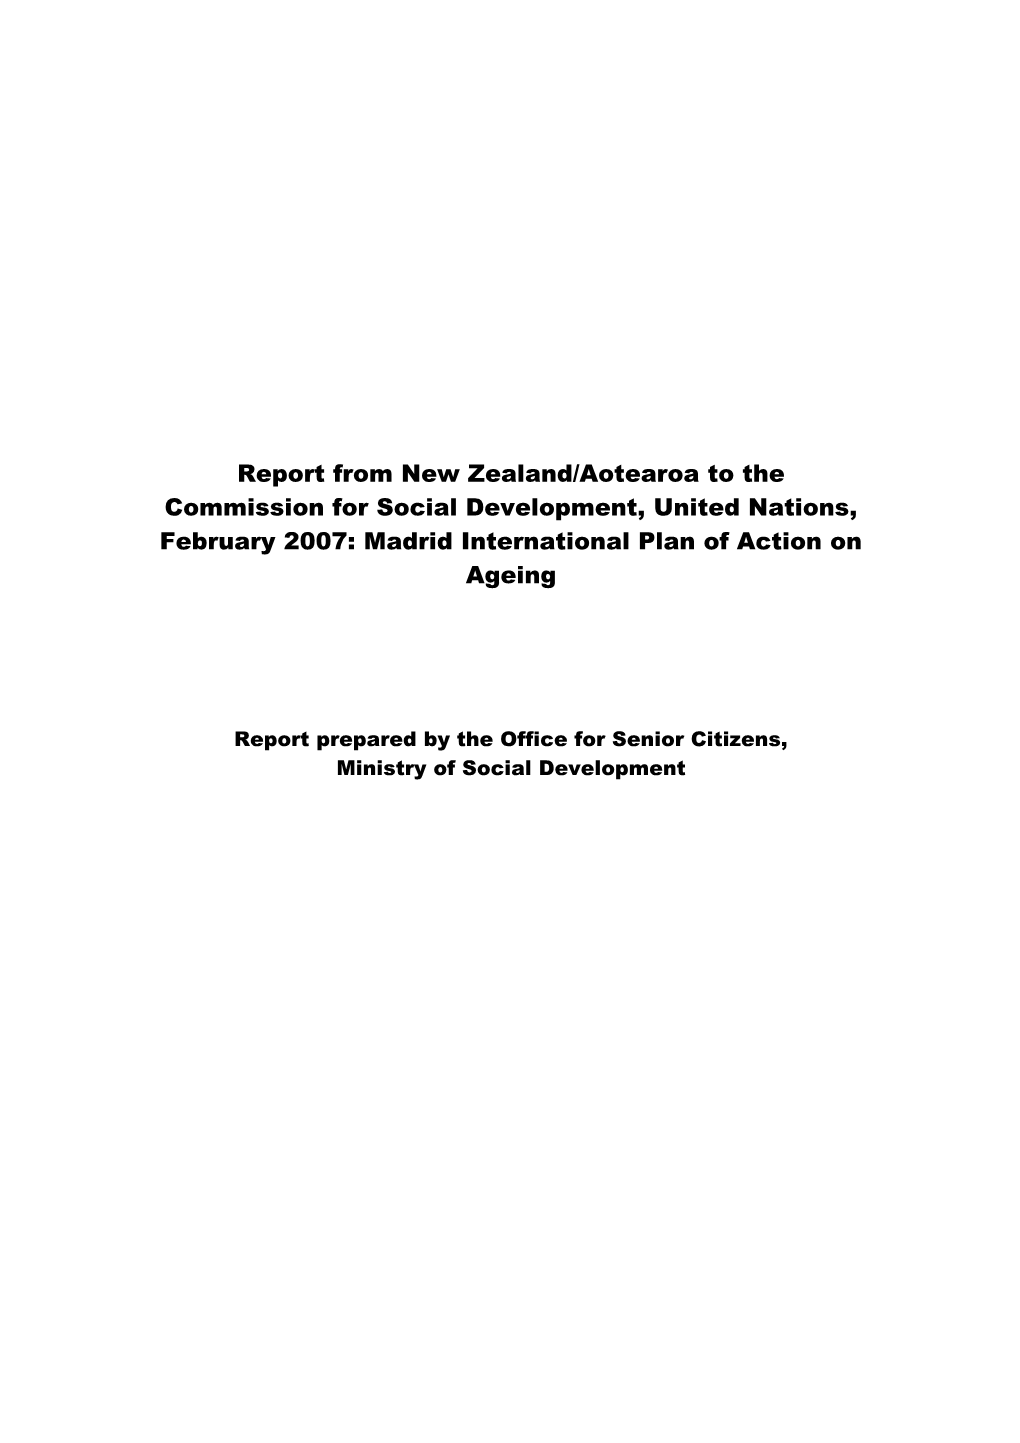 Report Back to United Nations, February 2007: Madrid International Plan of Action on Ageing